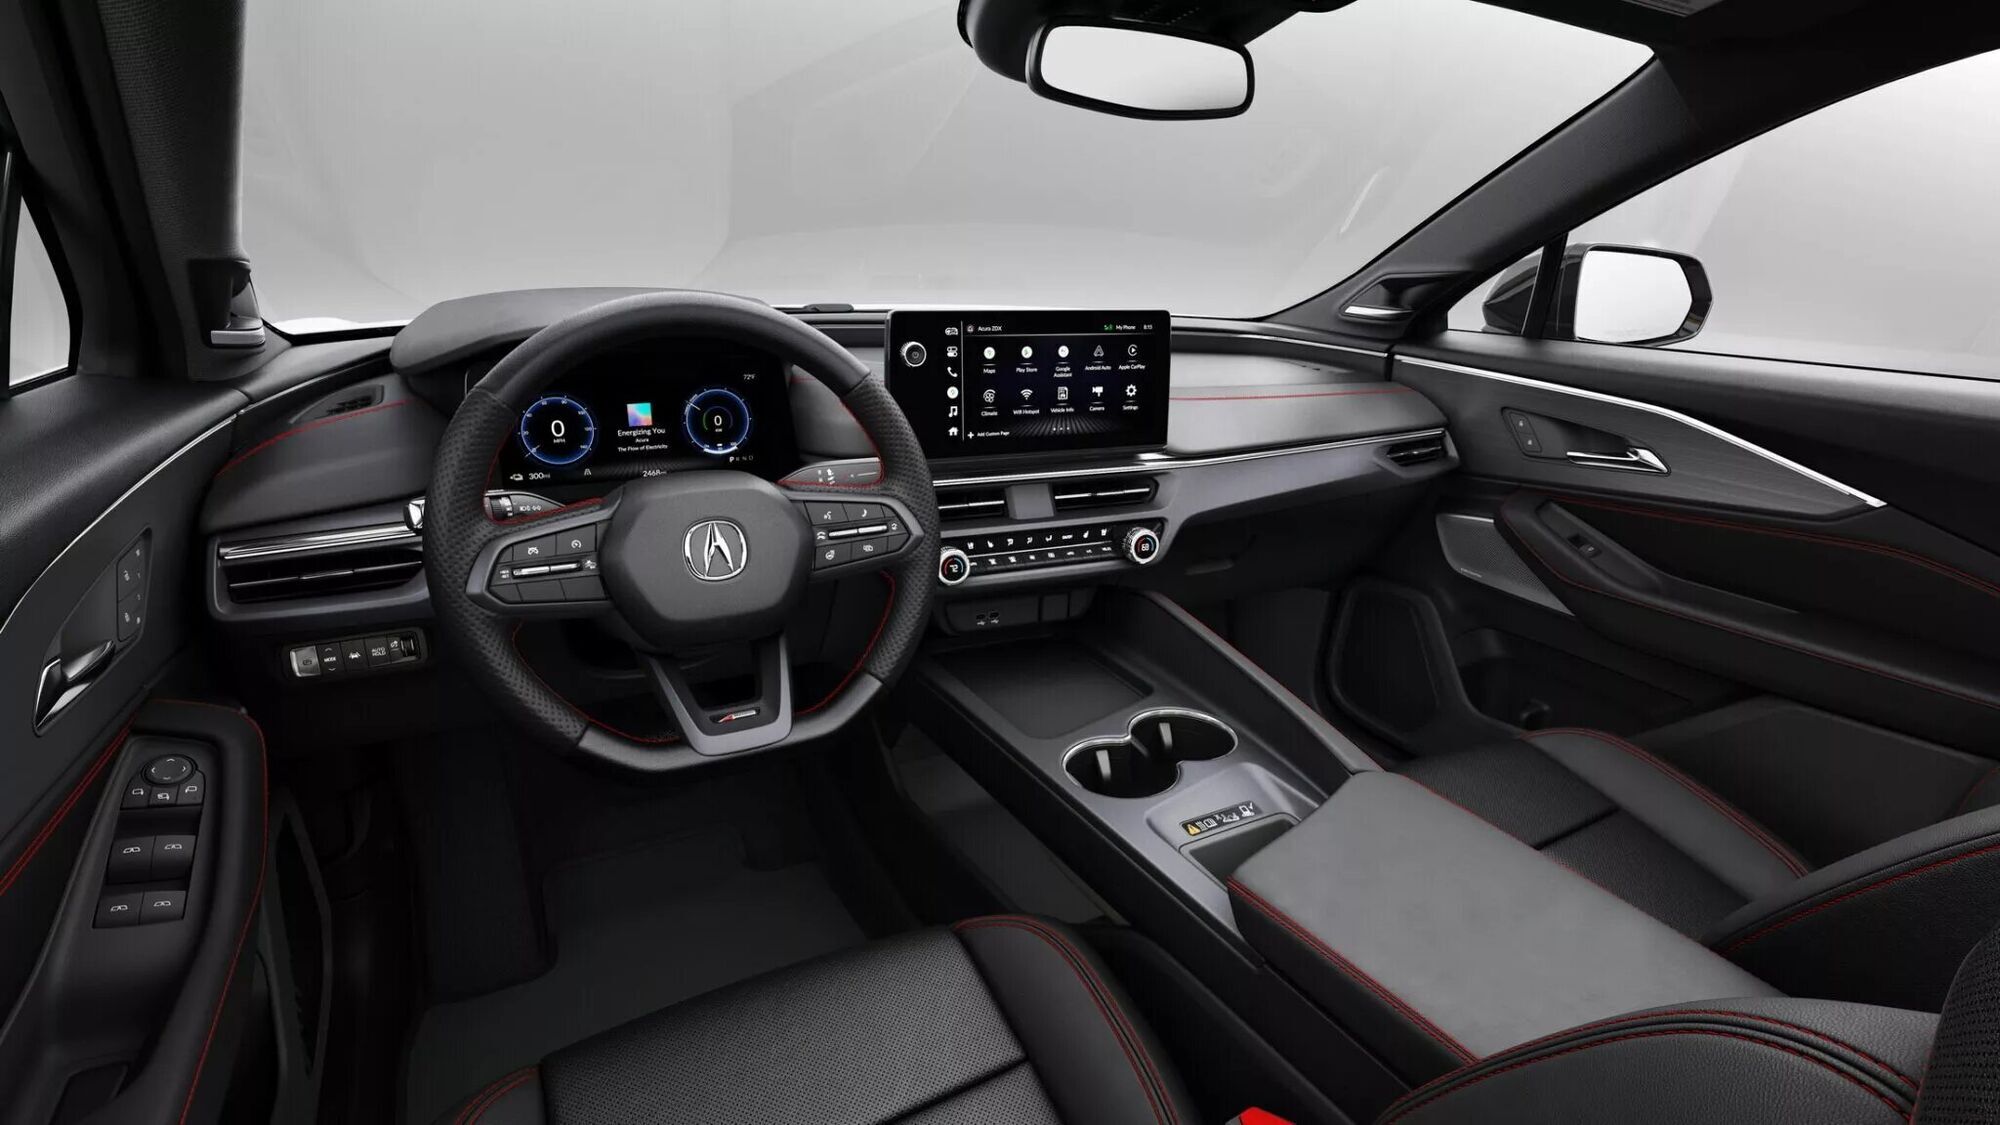 Acura has shown its first electric car. Video